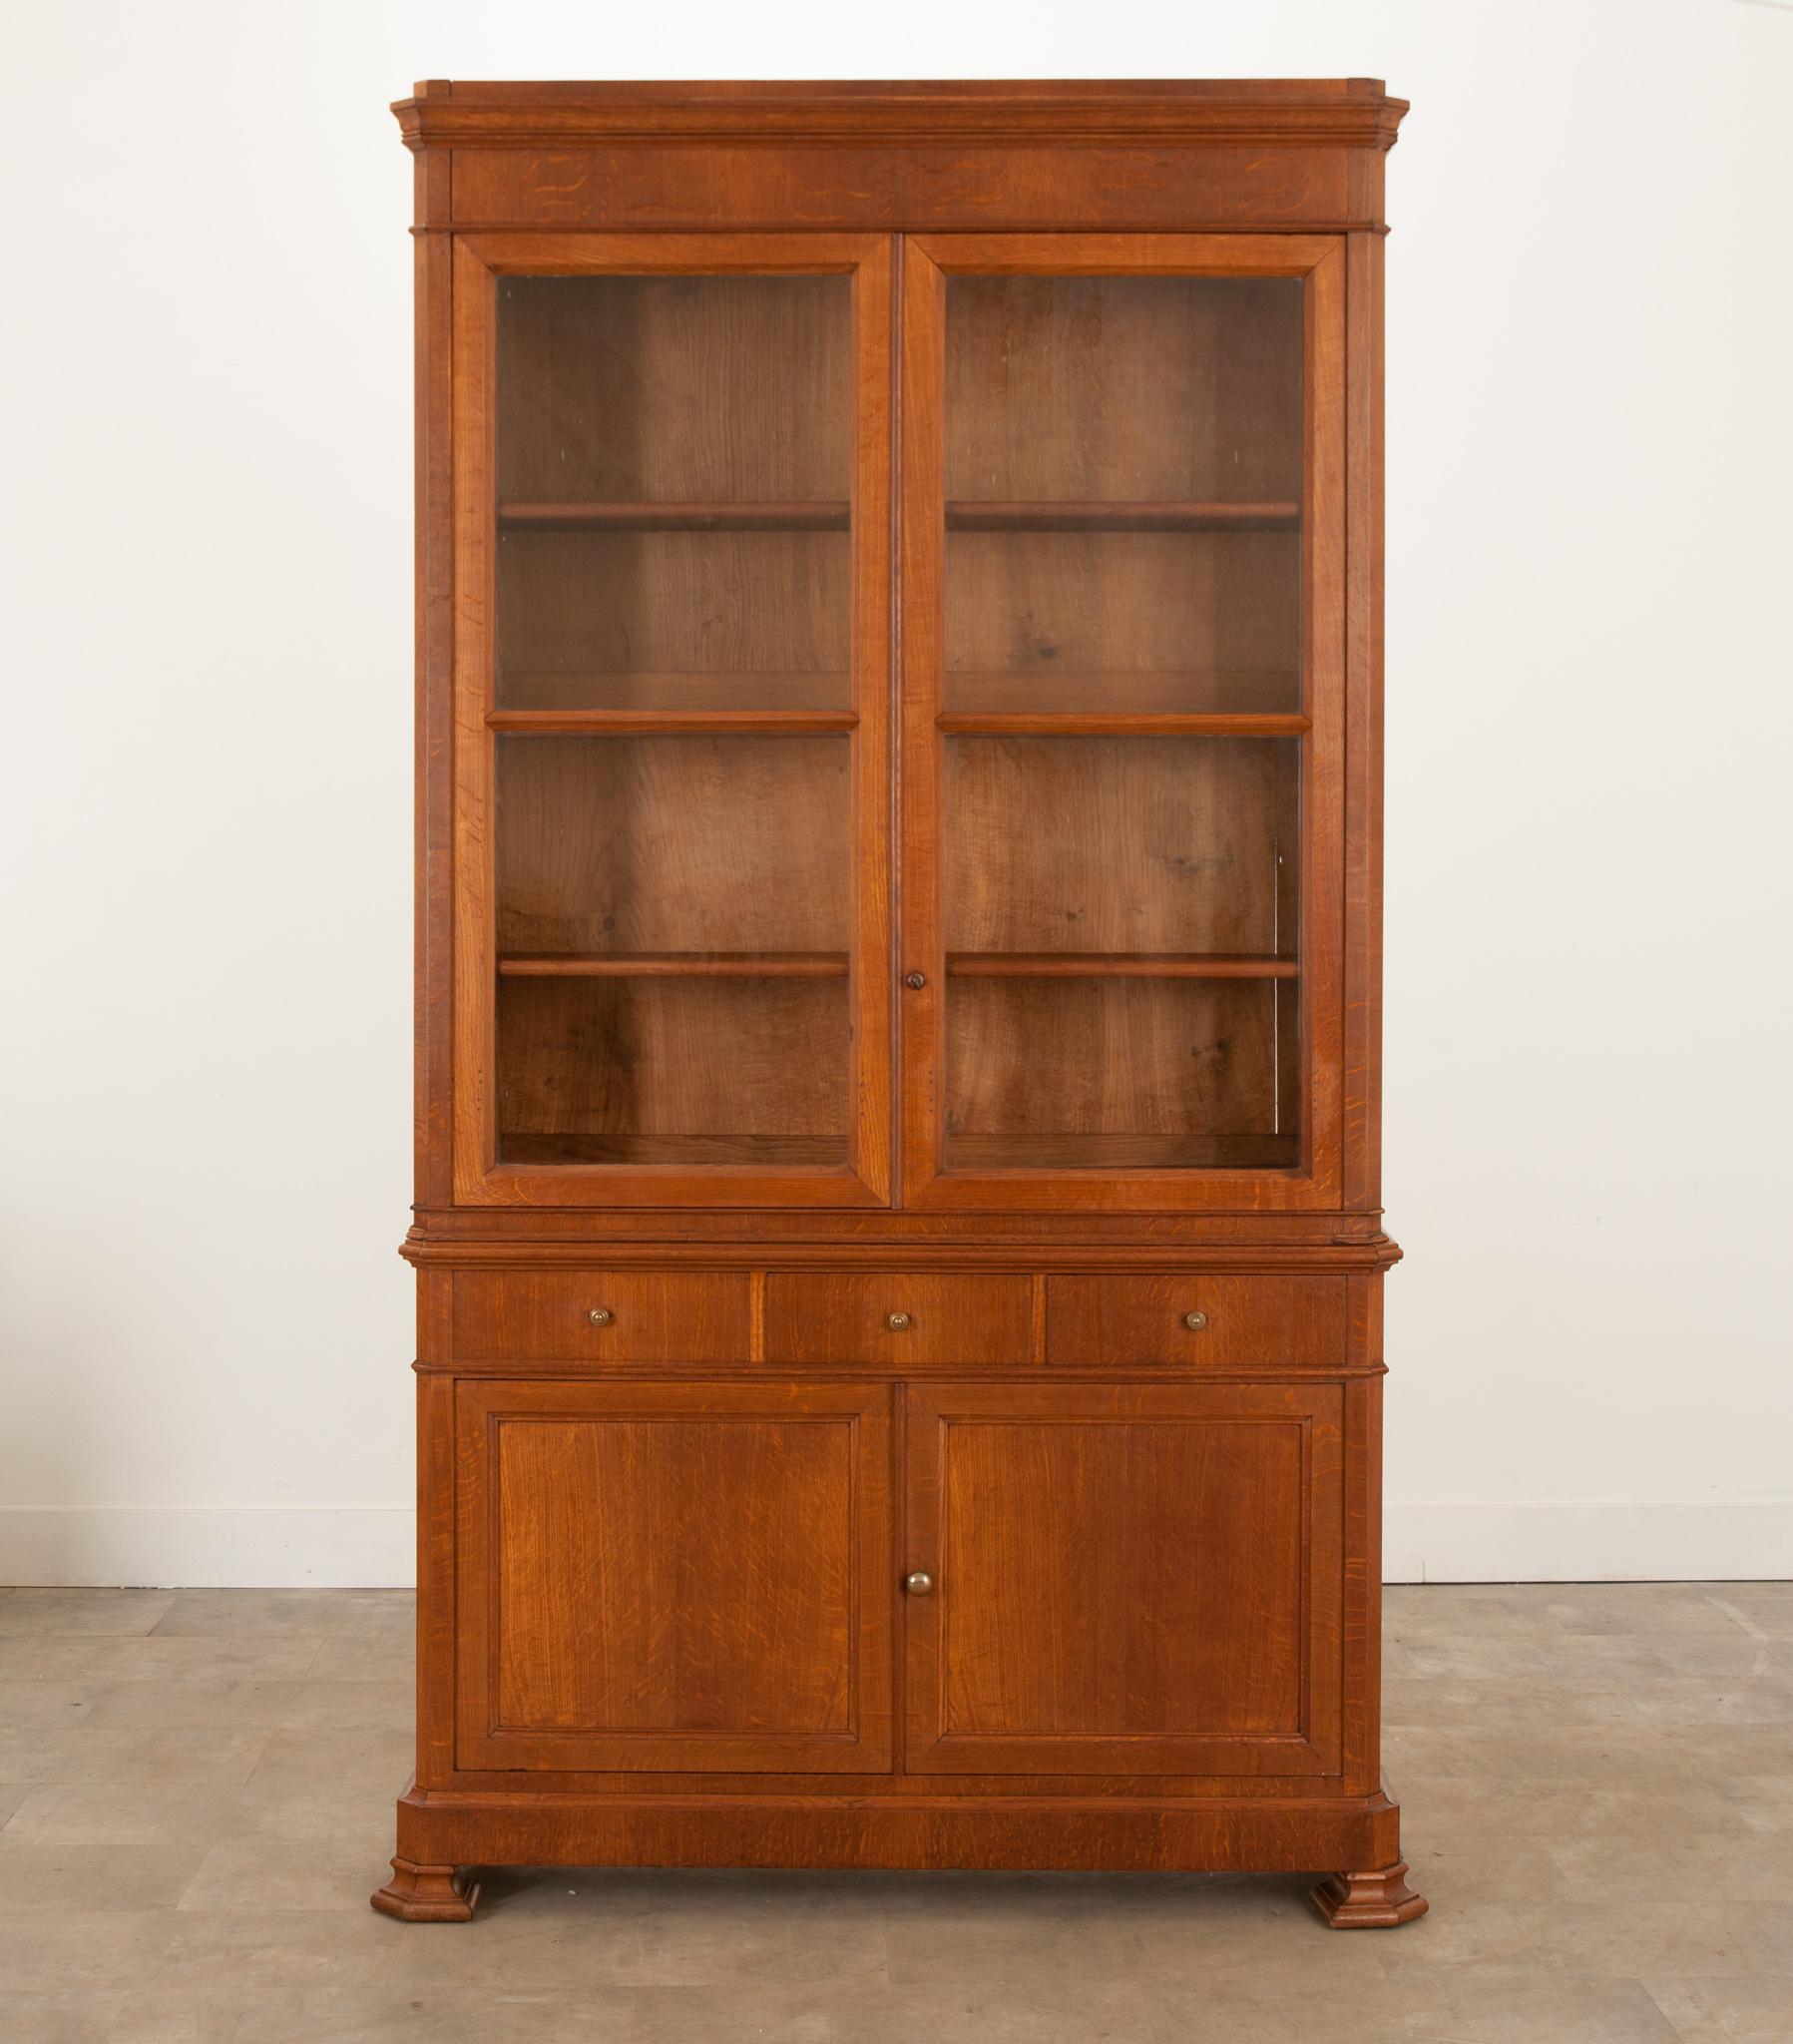 A fantastic French Louis Philippe style bibliotheque, finished in beautiful, quarter sawn oak, circa 1860. This uniquely shallow bookcase has an upper portion, outfitted with three adjustable shelves, set behind doors that contain their original